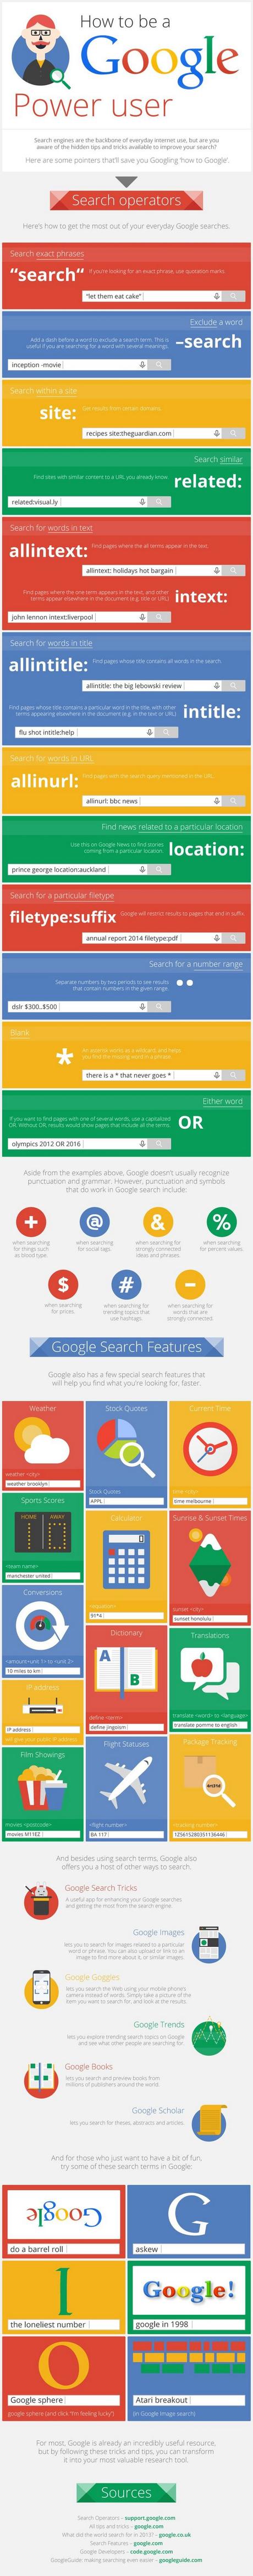 google-search-tips-infographic